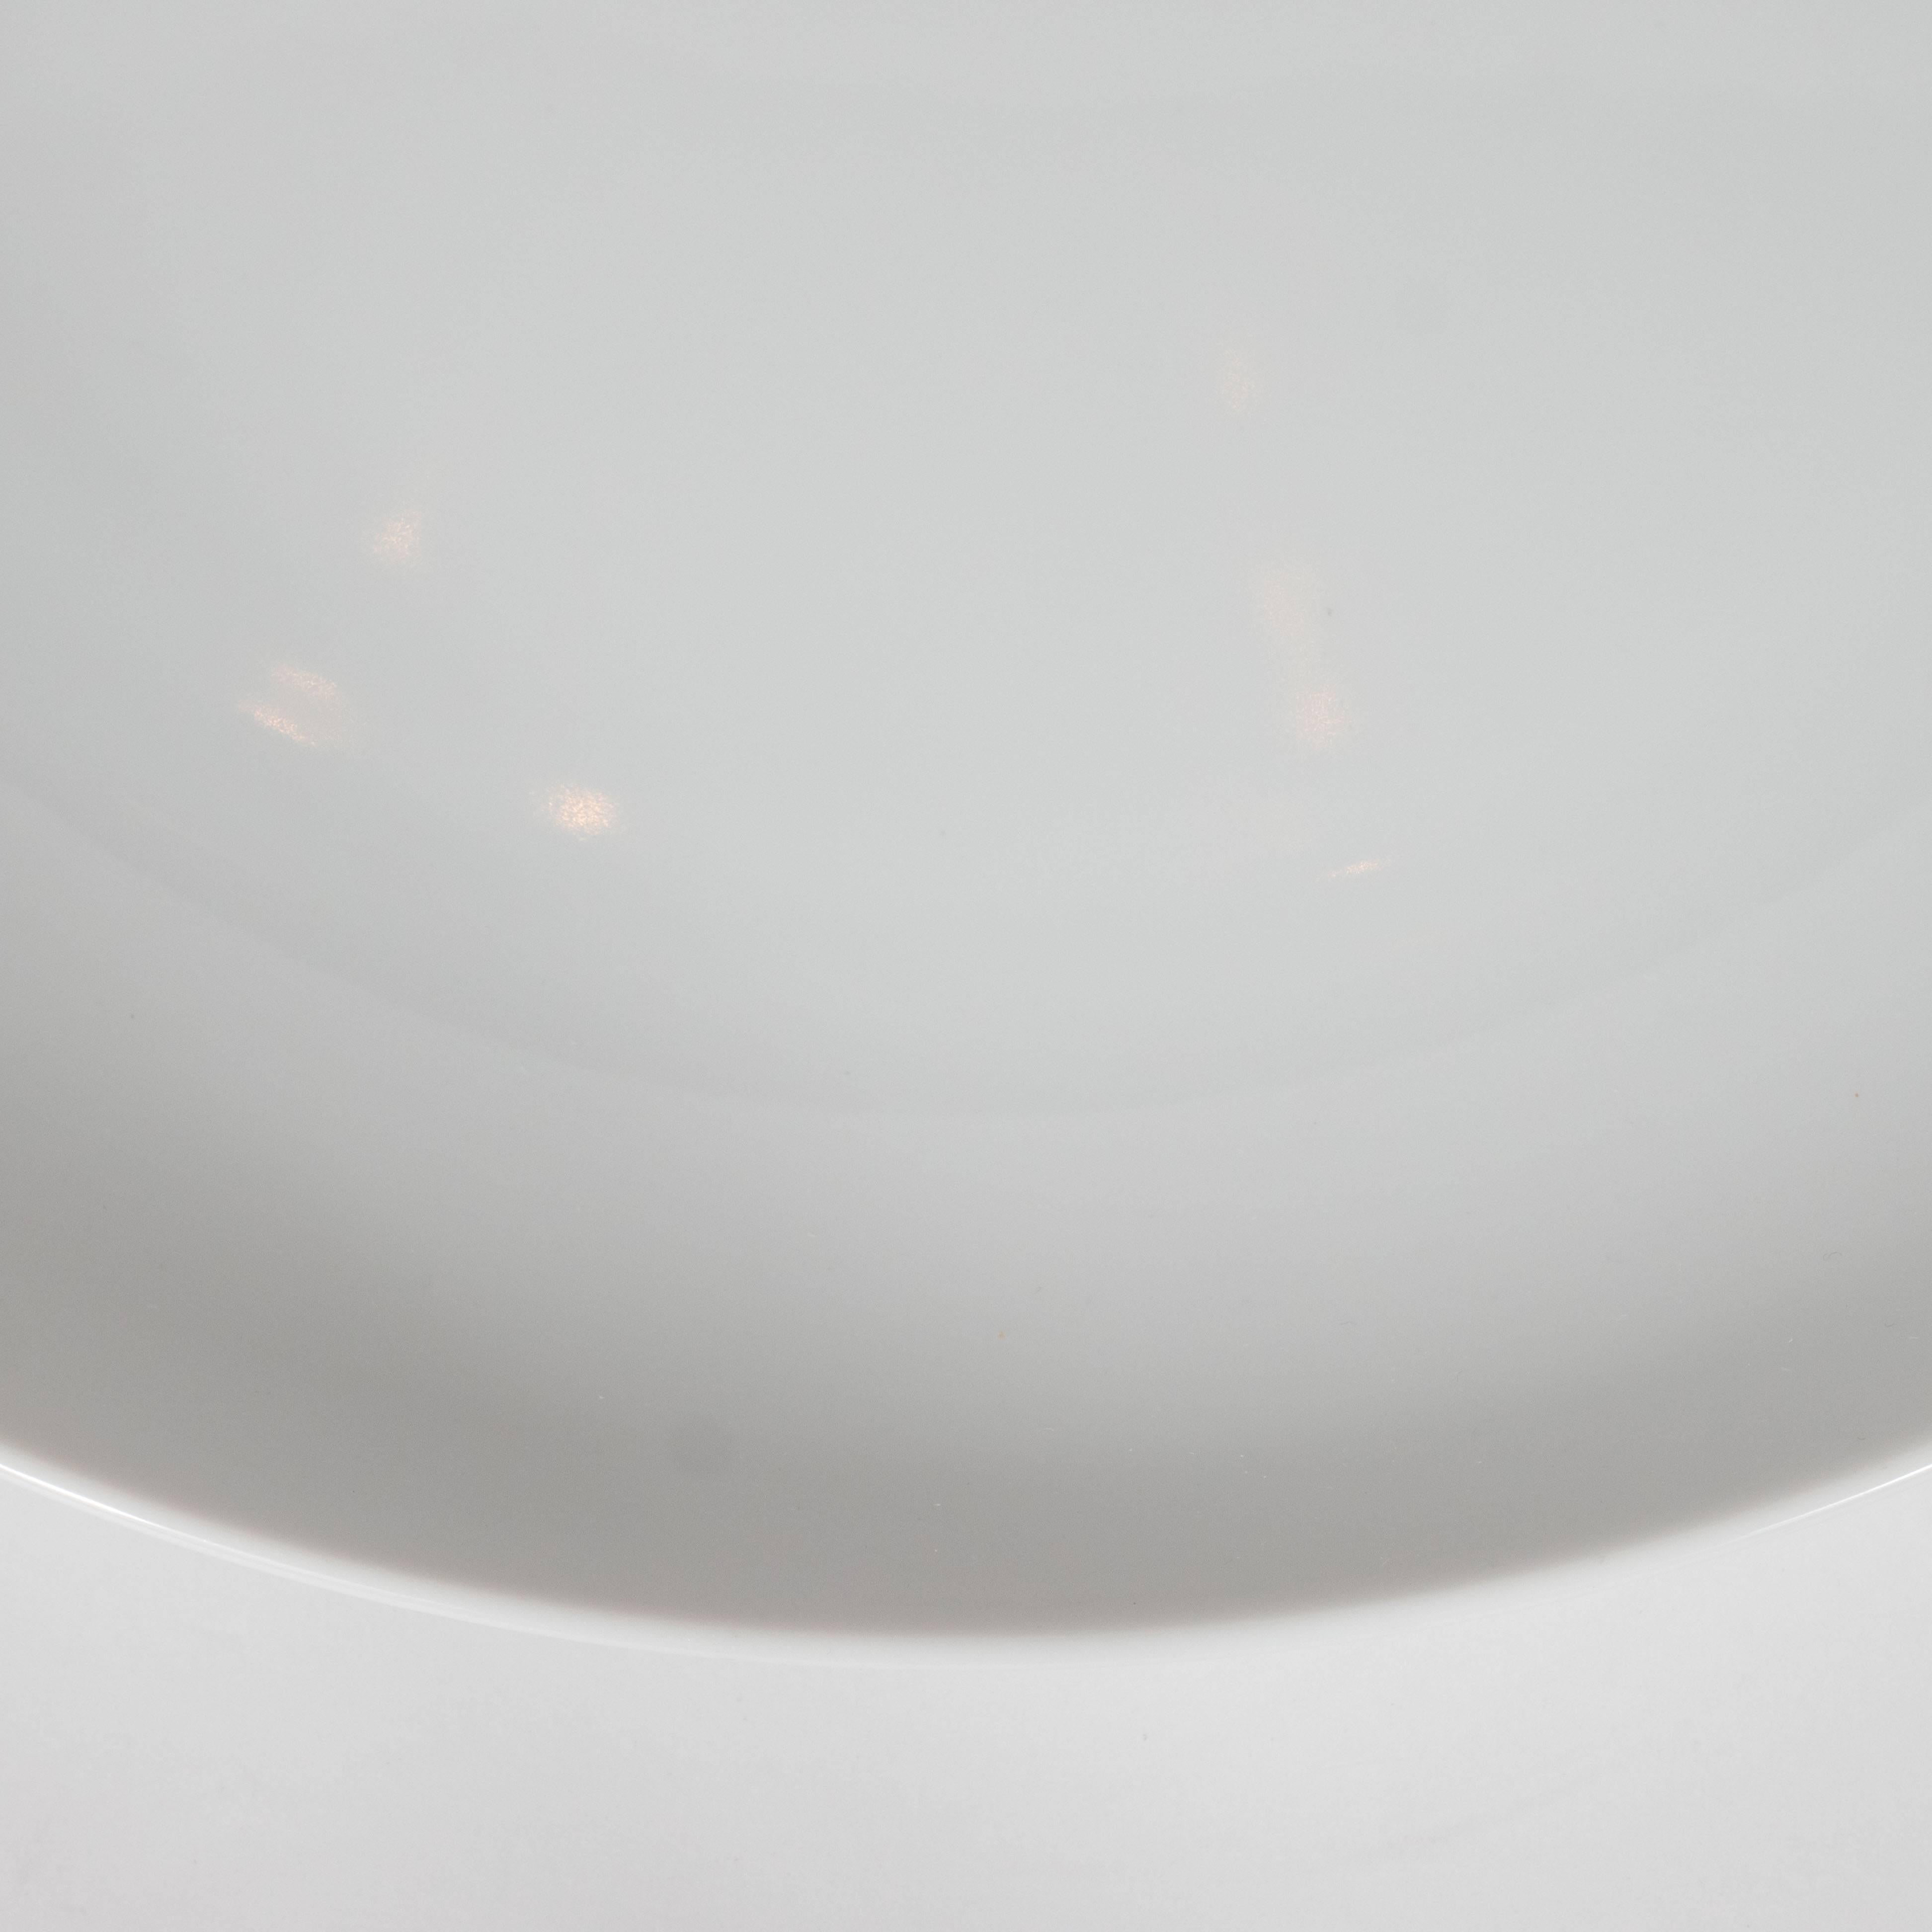 Three Mid-Century Modern White Ceramic Serving Plate by Tiffany & Co. 1